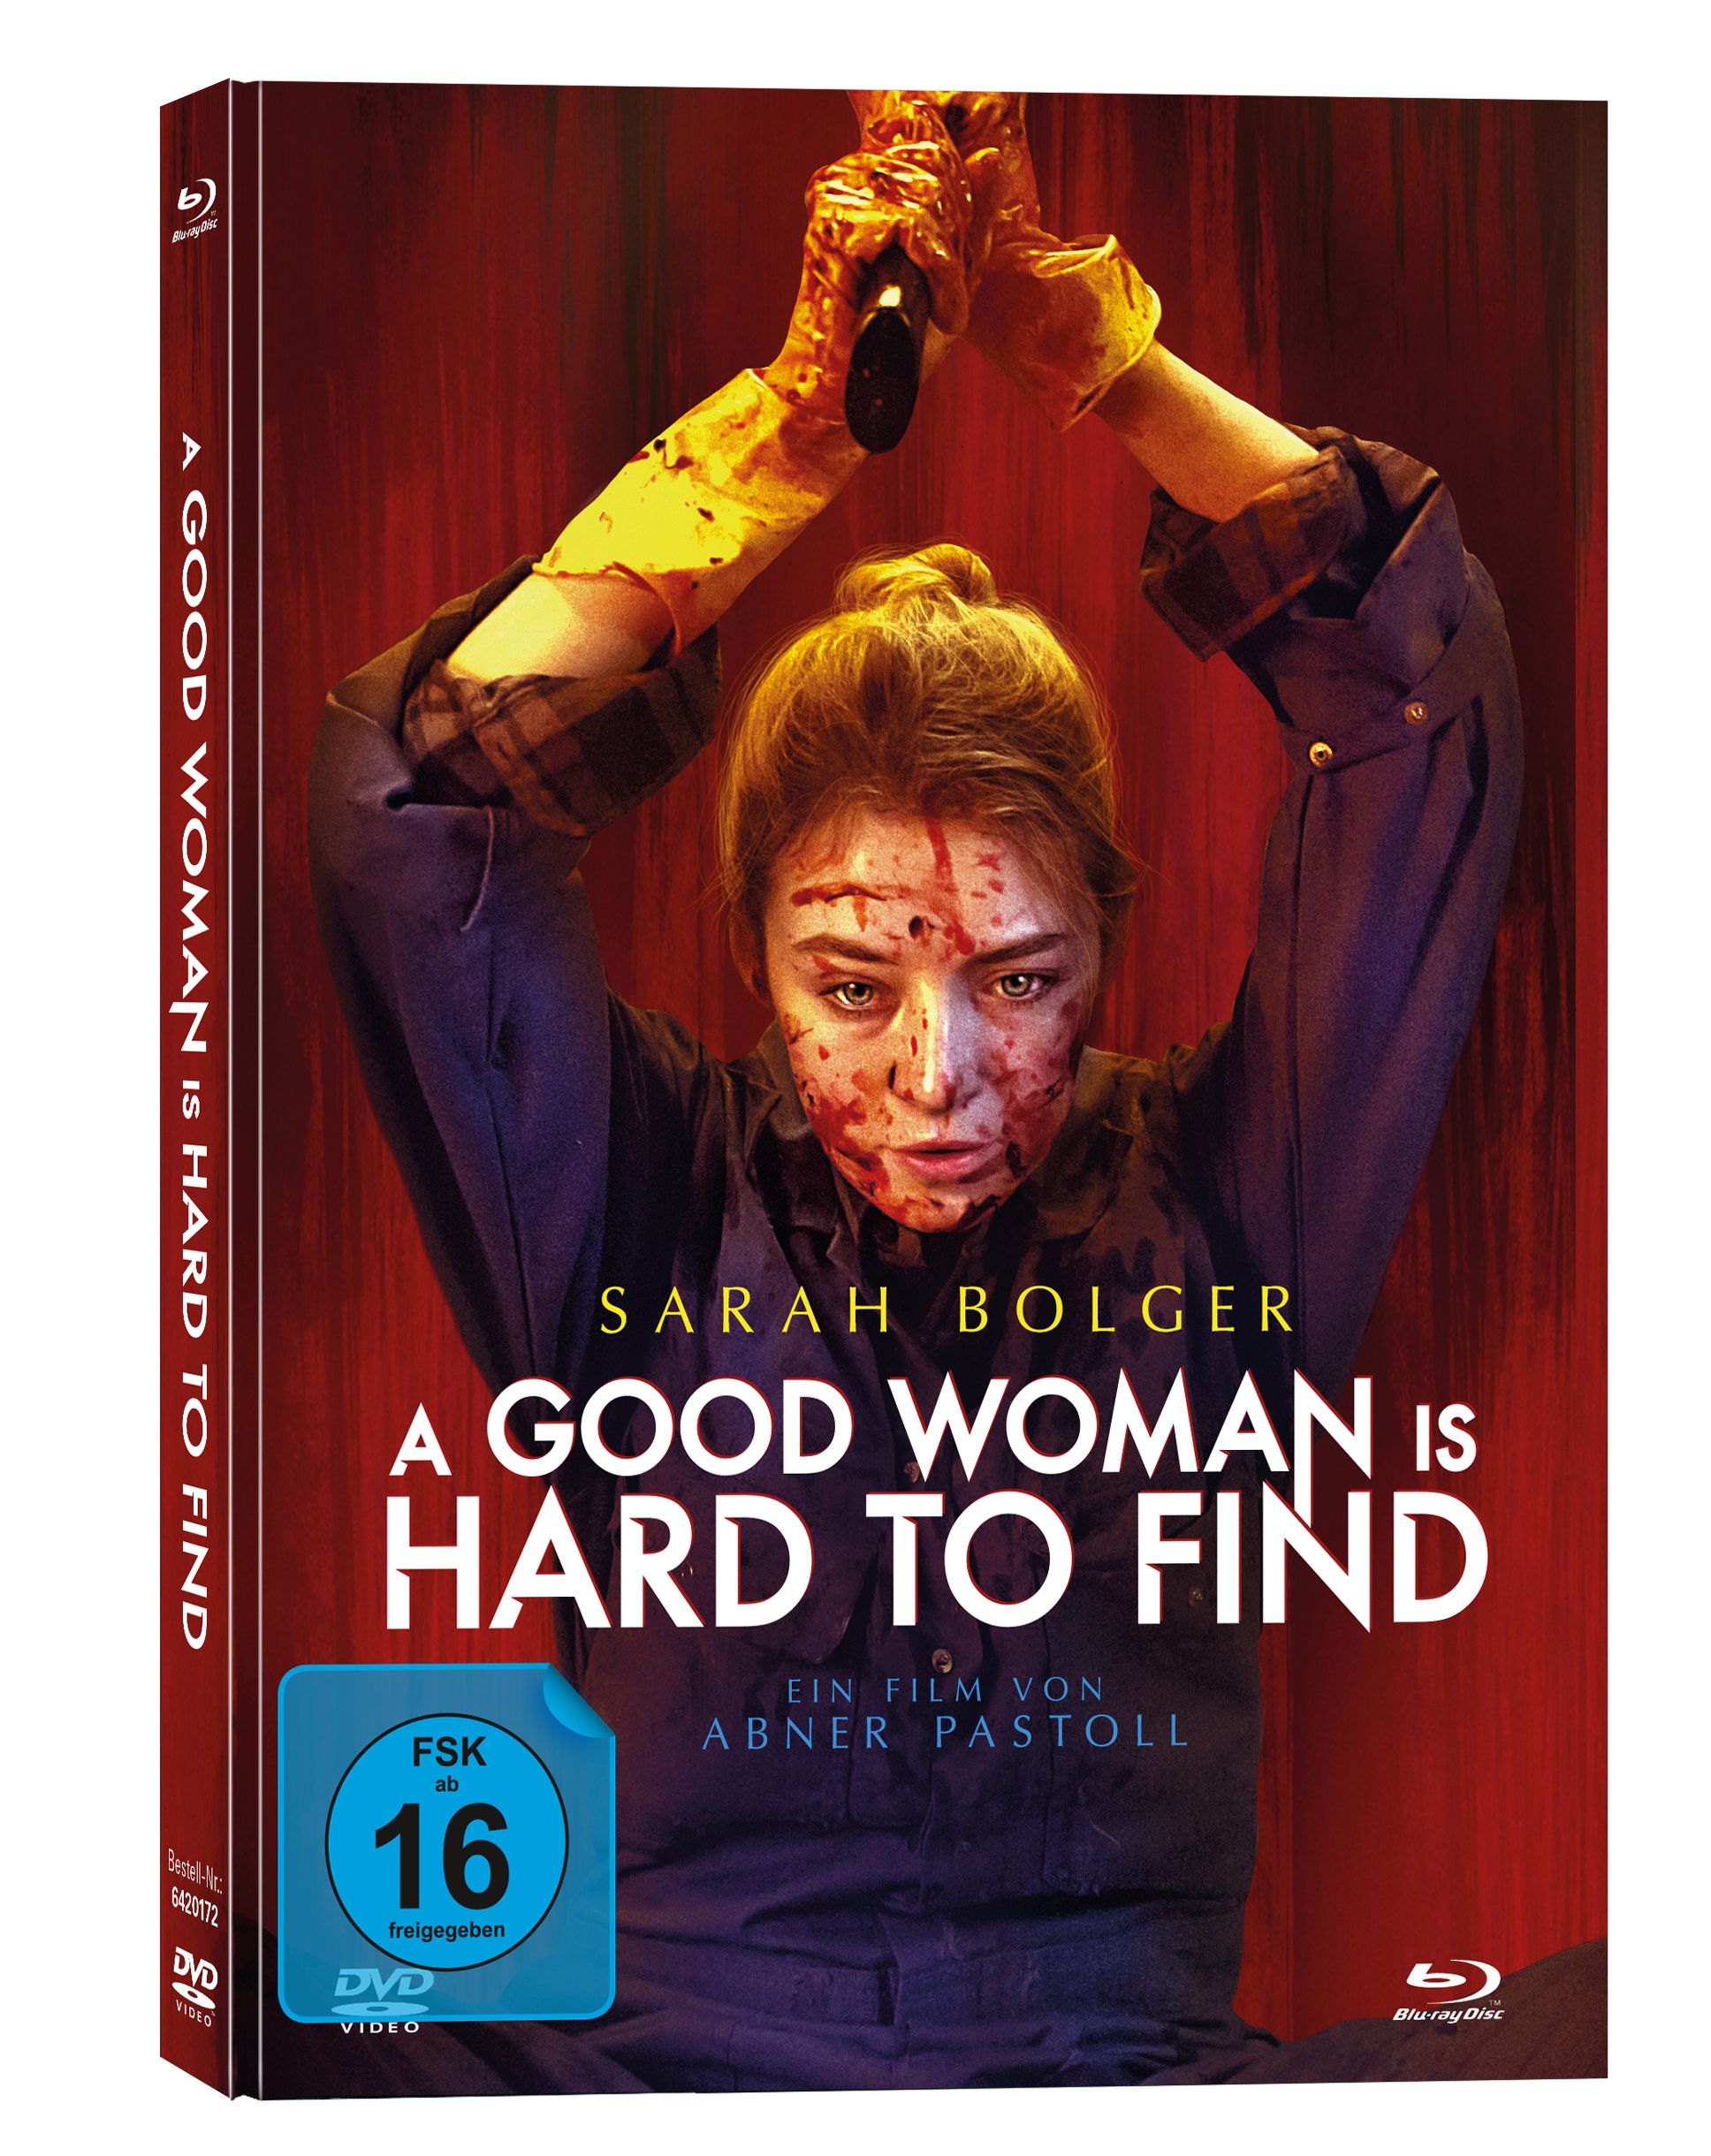 A Good Woman Is Hard to Find - 2-Disc Limited Collector's Edition im Mediabook (Blu-ray + DVD)